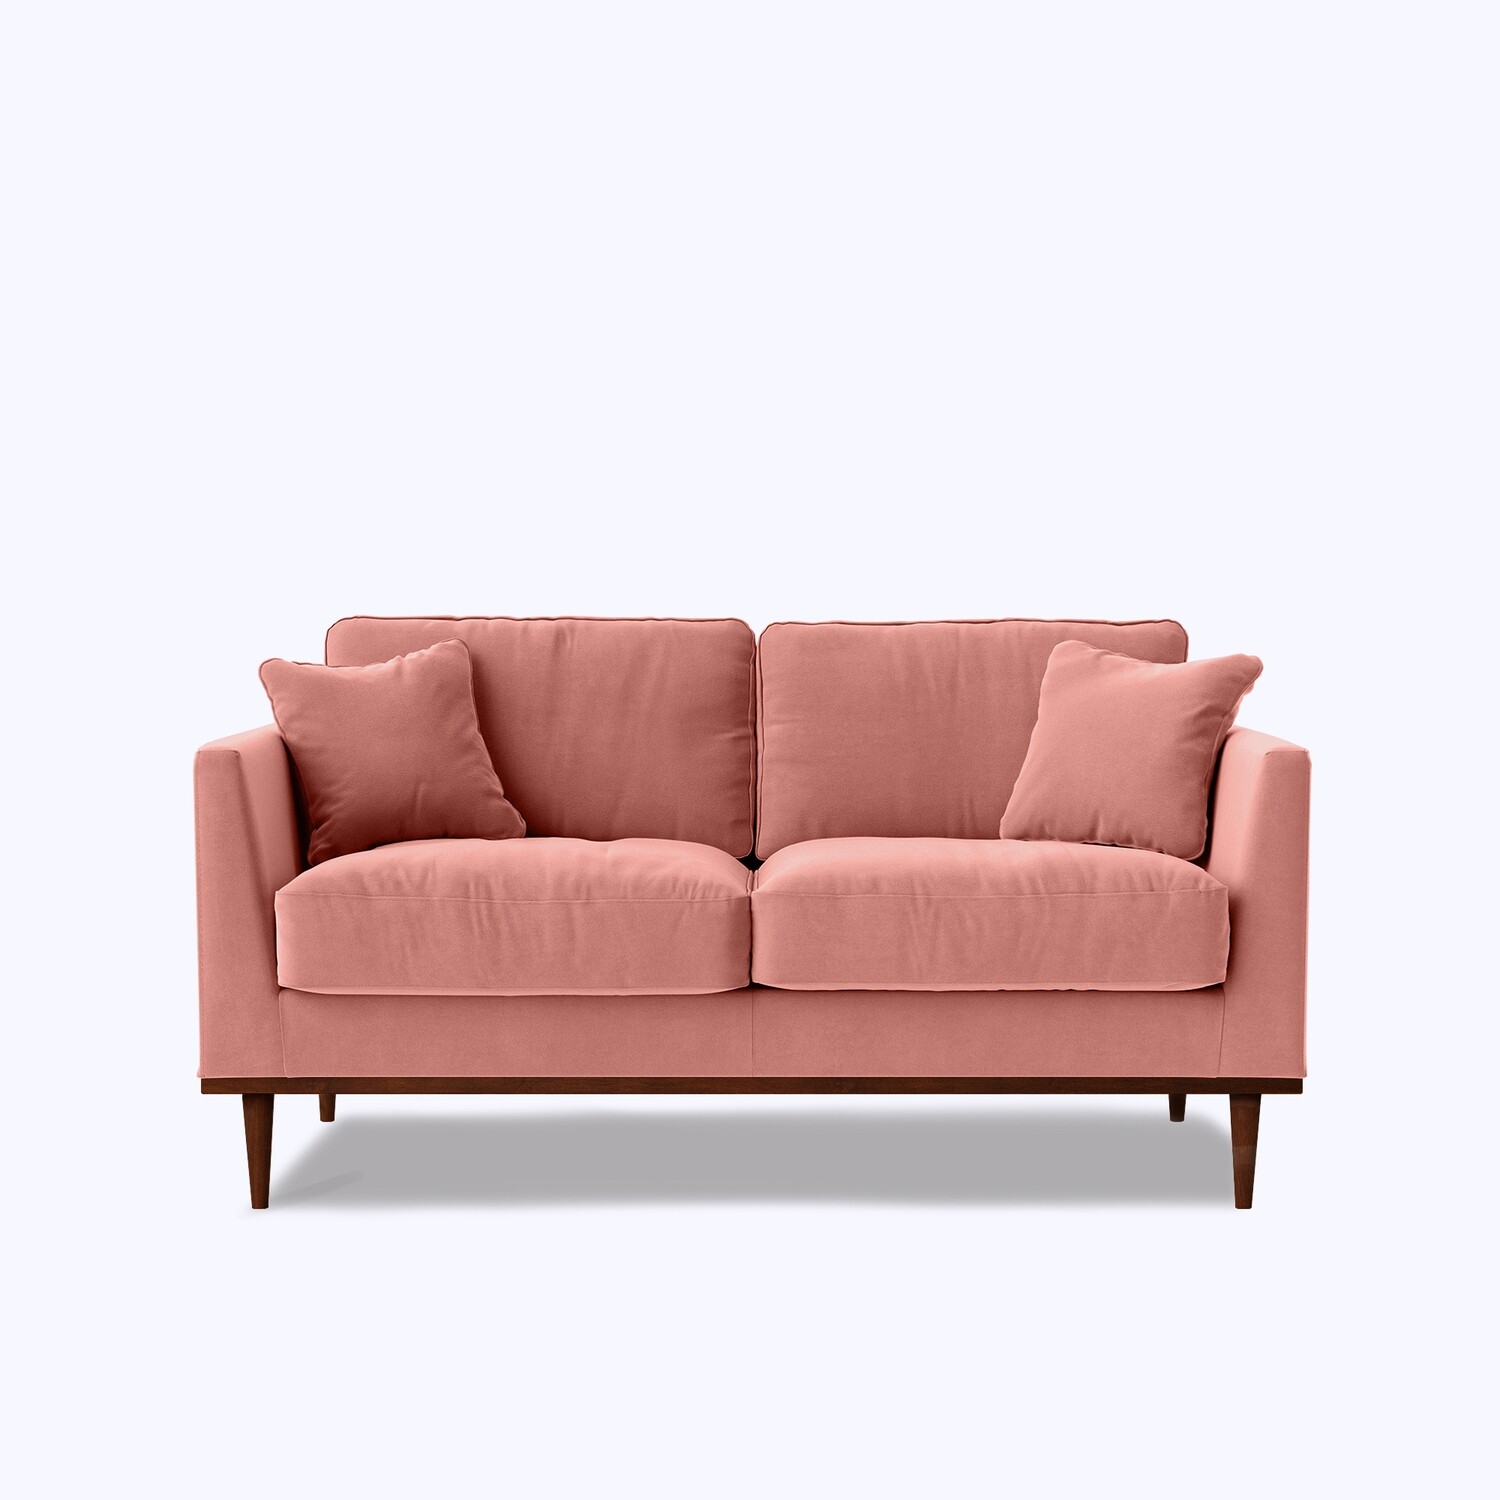 Nord 2 Seater Sofa - 72"